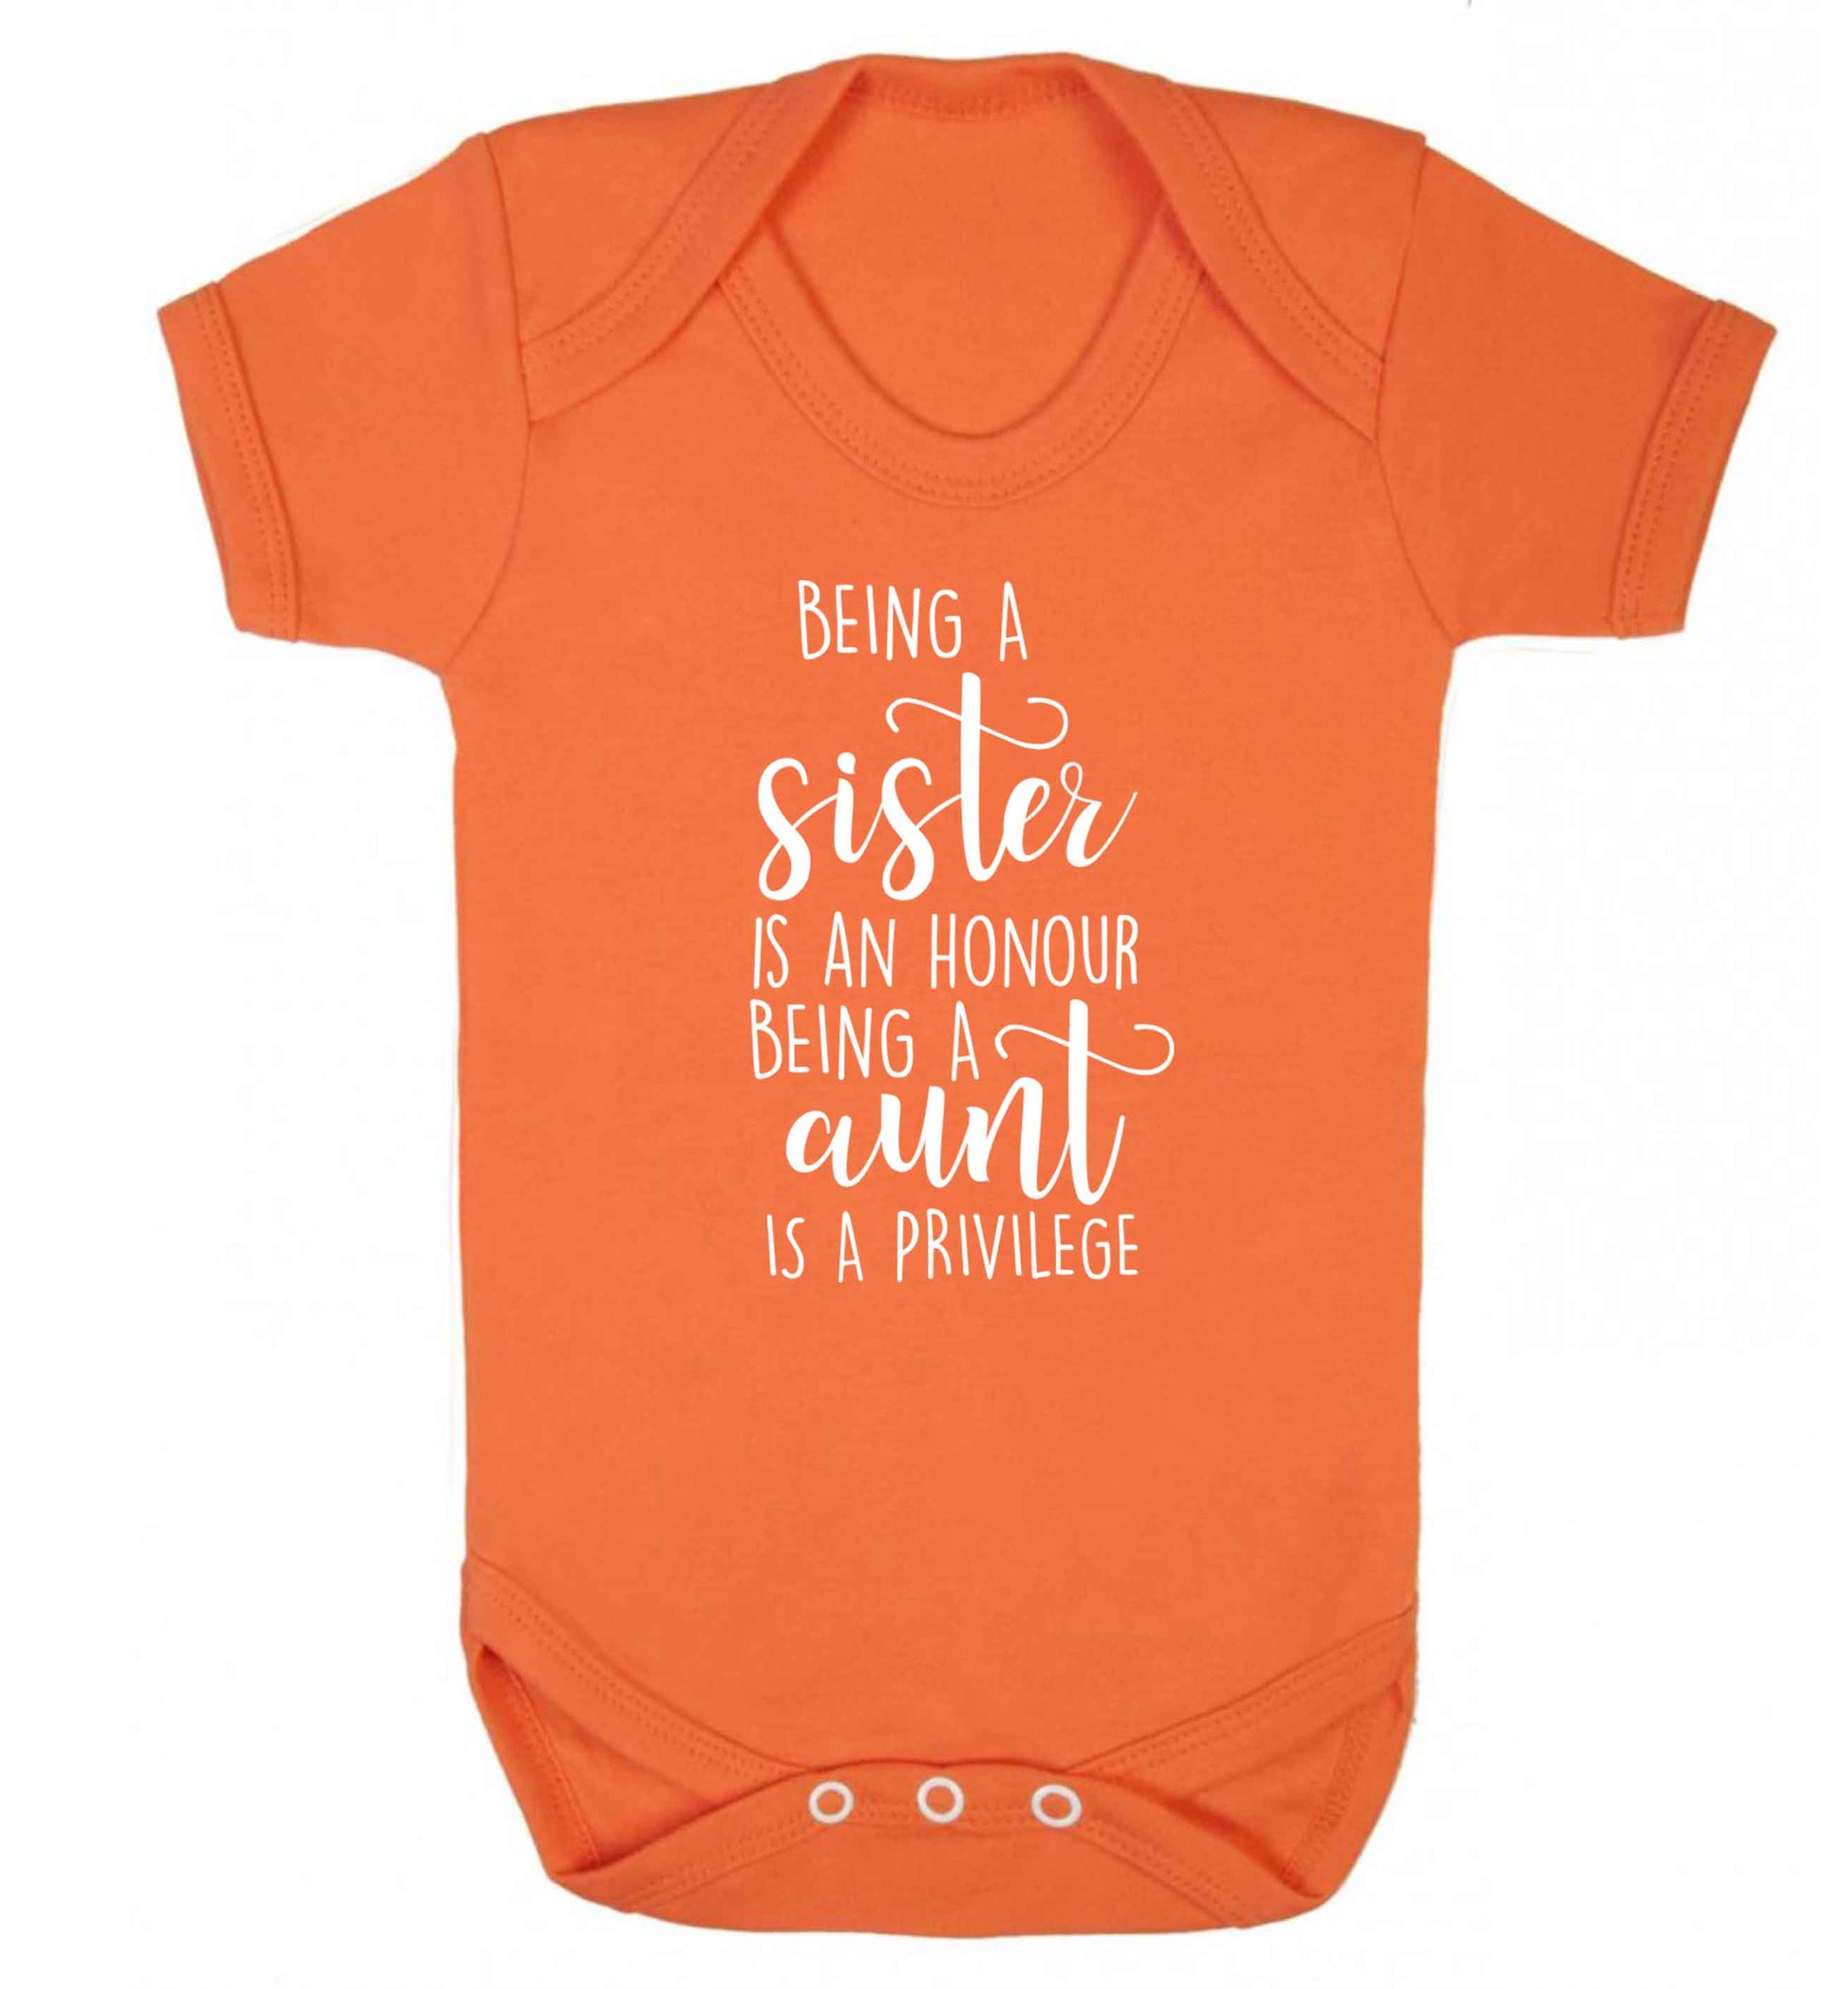 Being a sister is an honour being an auntie is a privilege Baby Vest orange 18-24 months